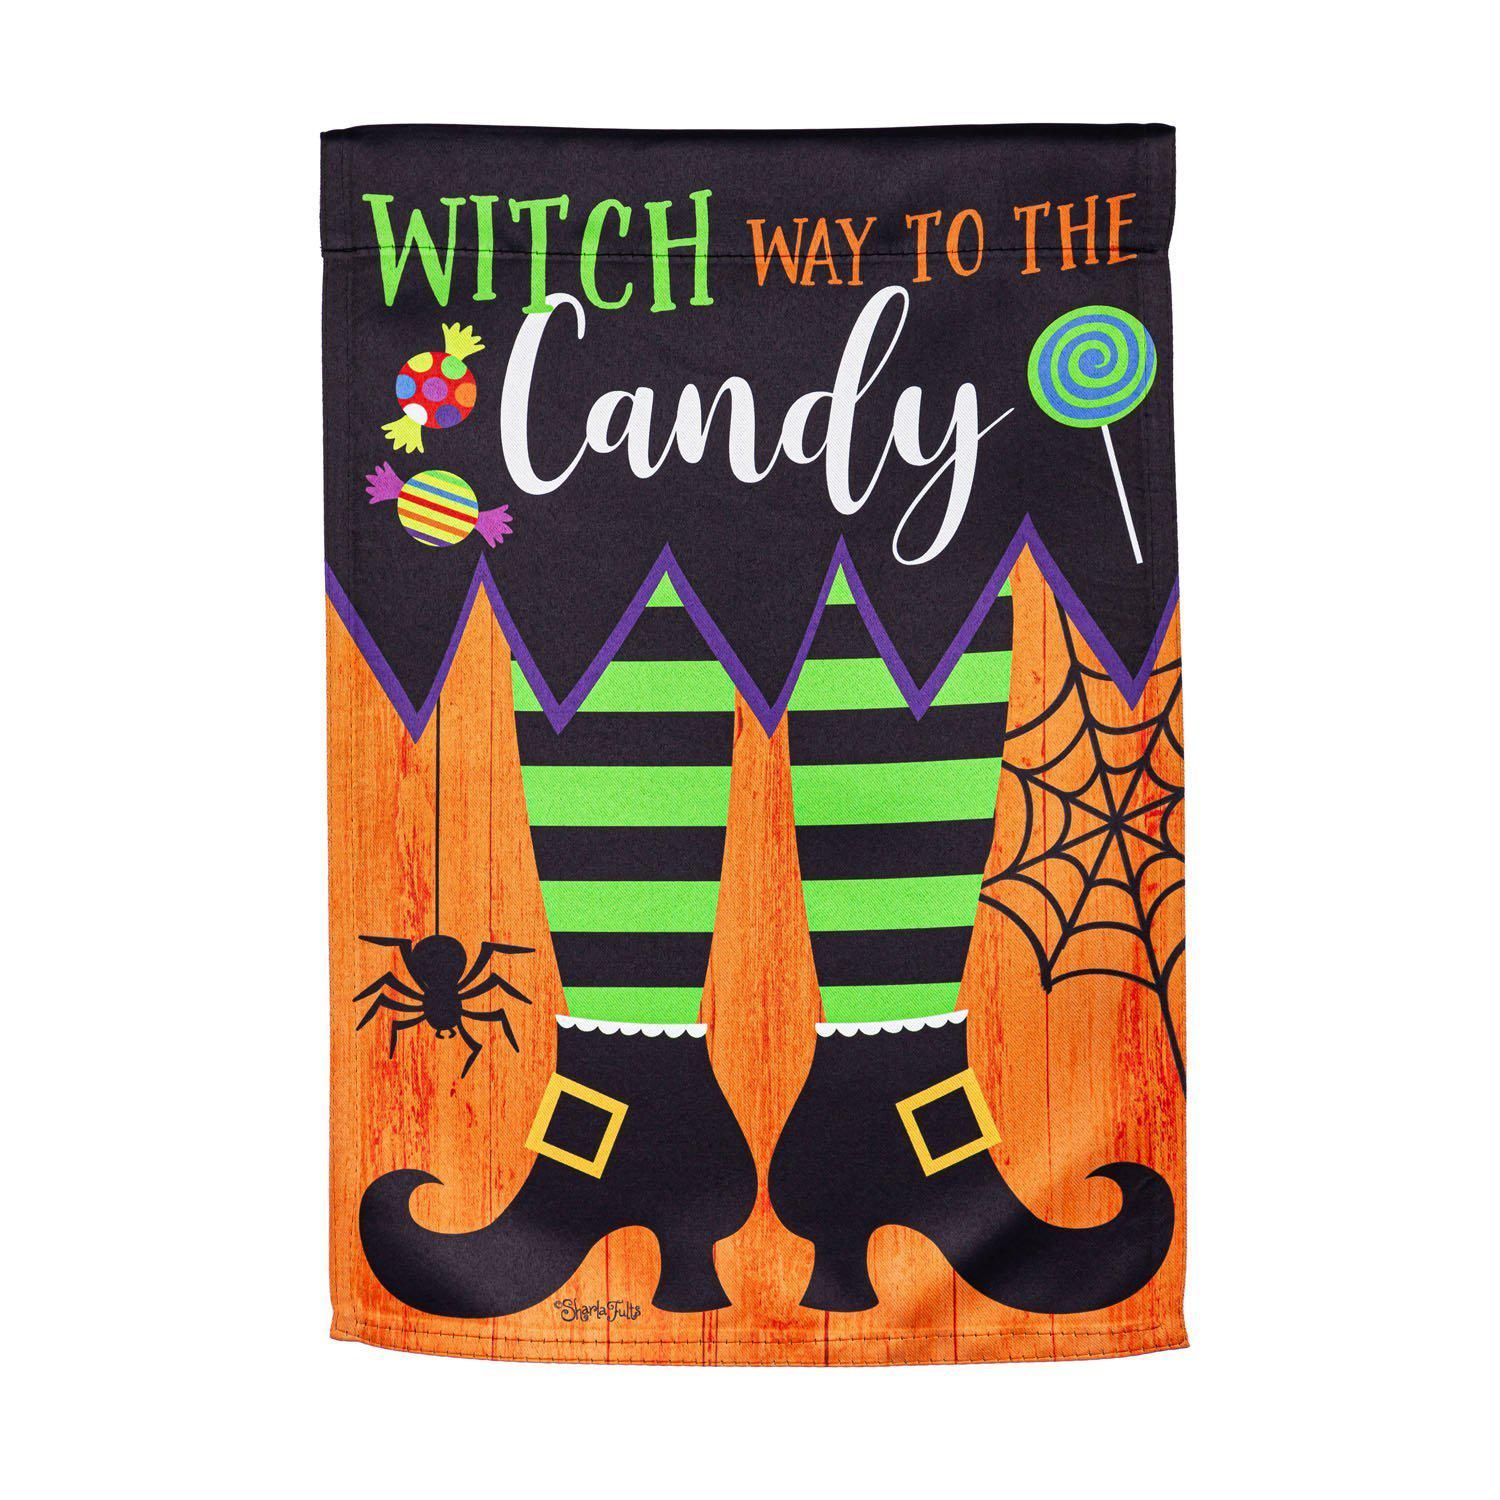 The Witch Way garden flag features a pair of witch feet and the words "Witch Way to the Candy". 